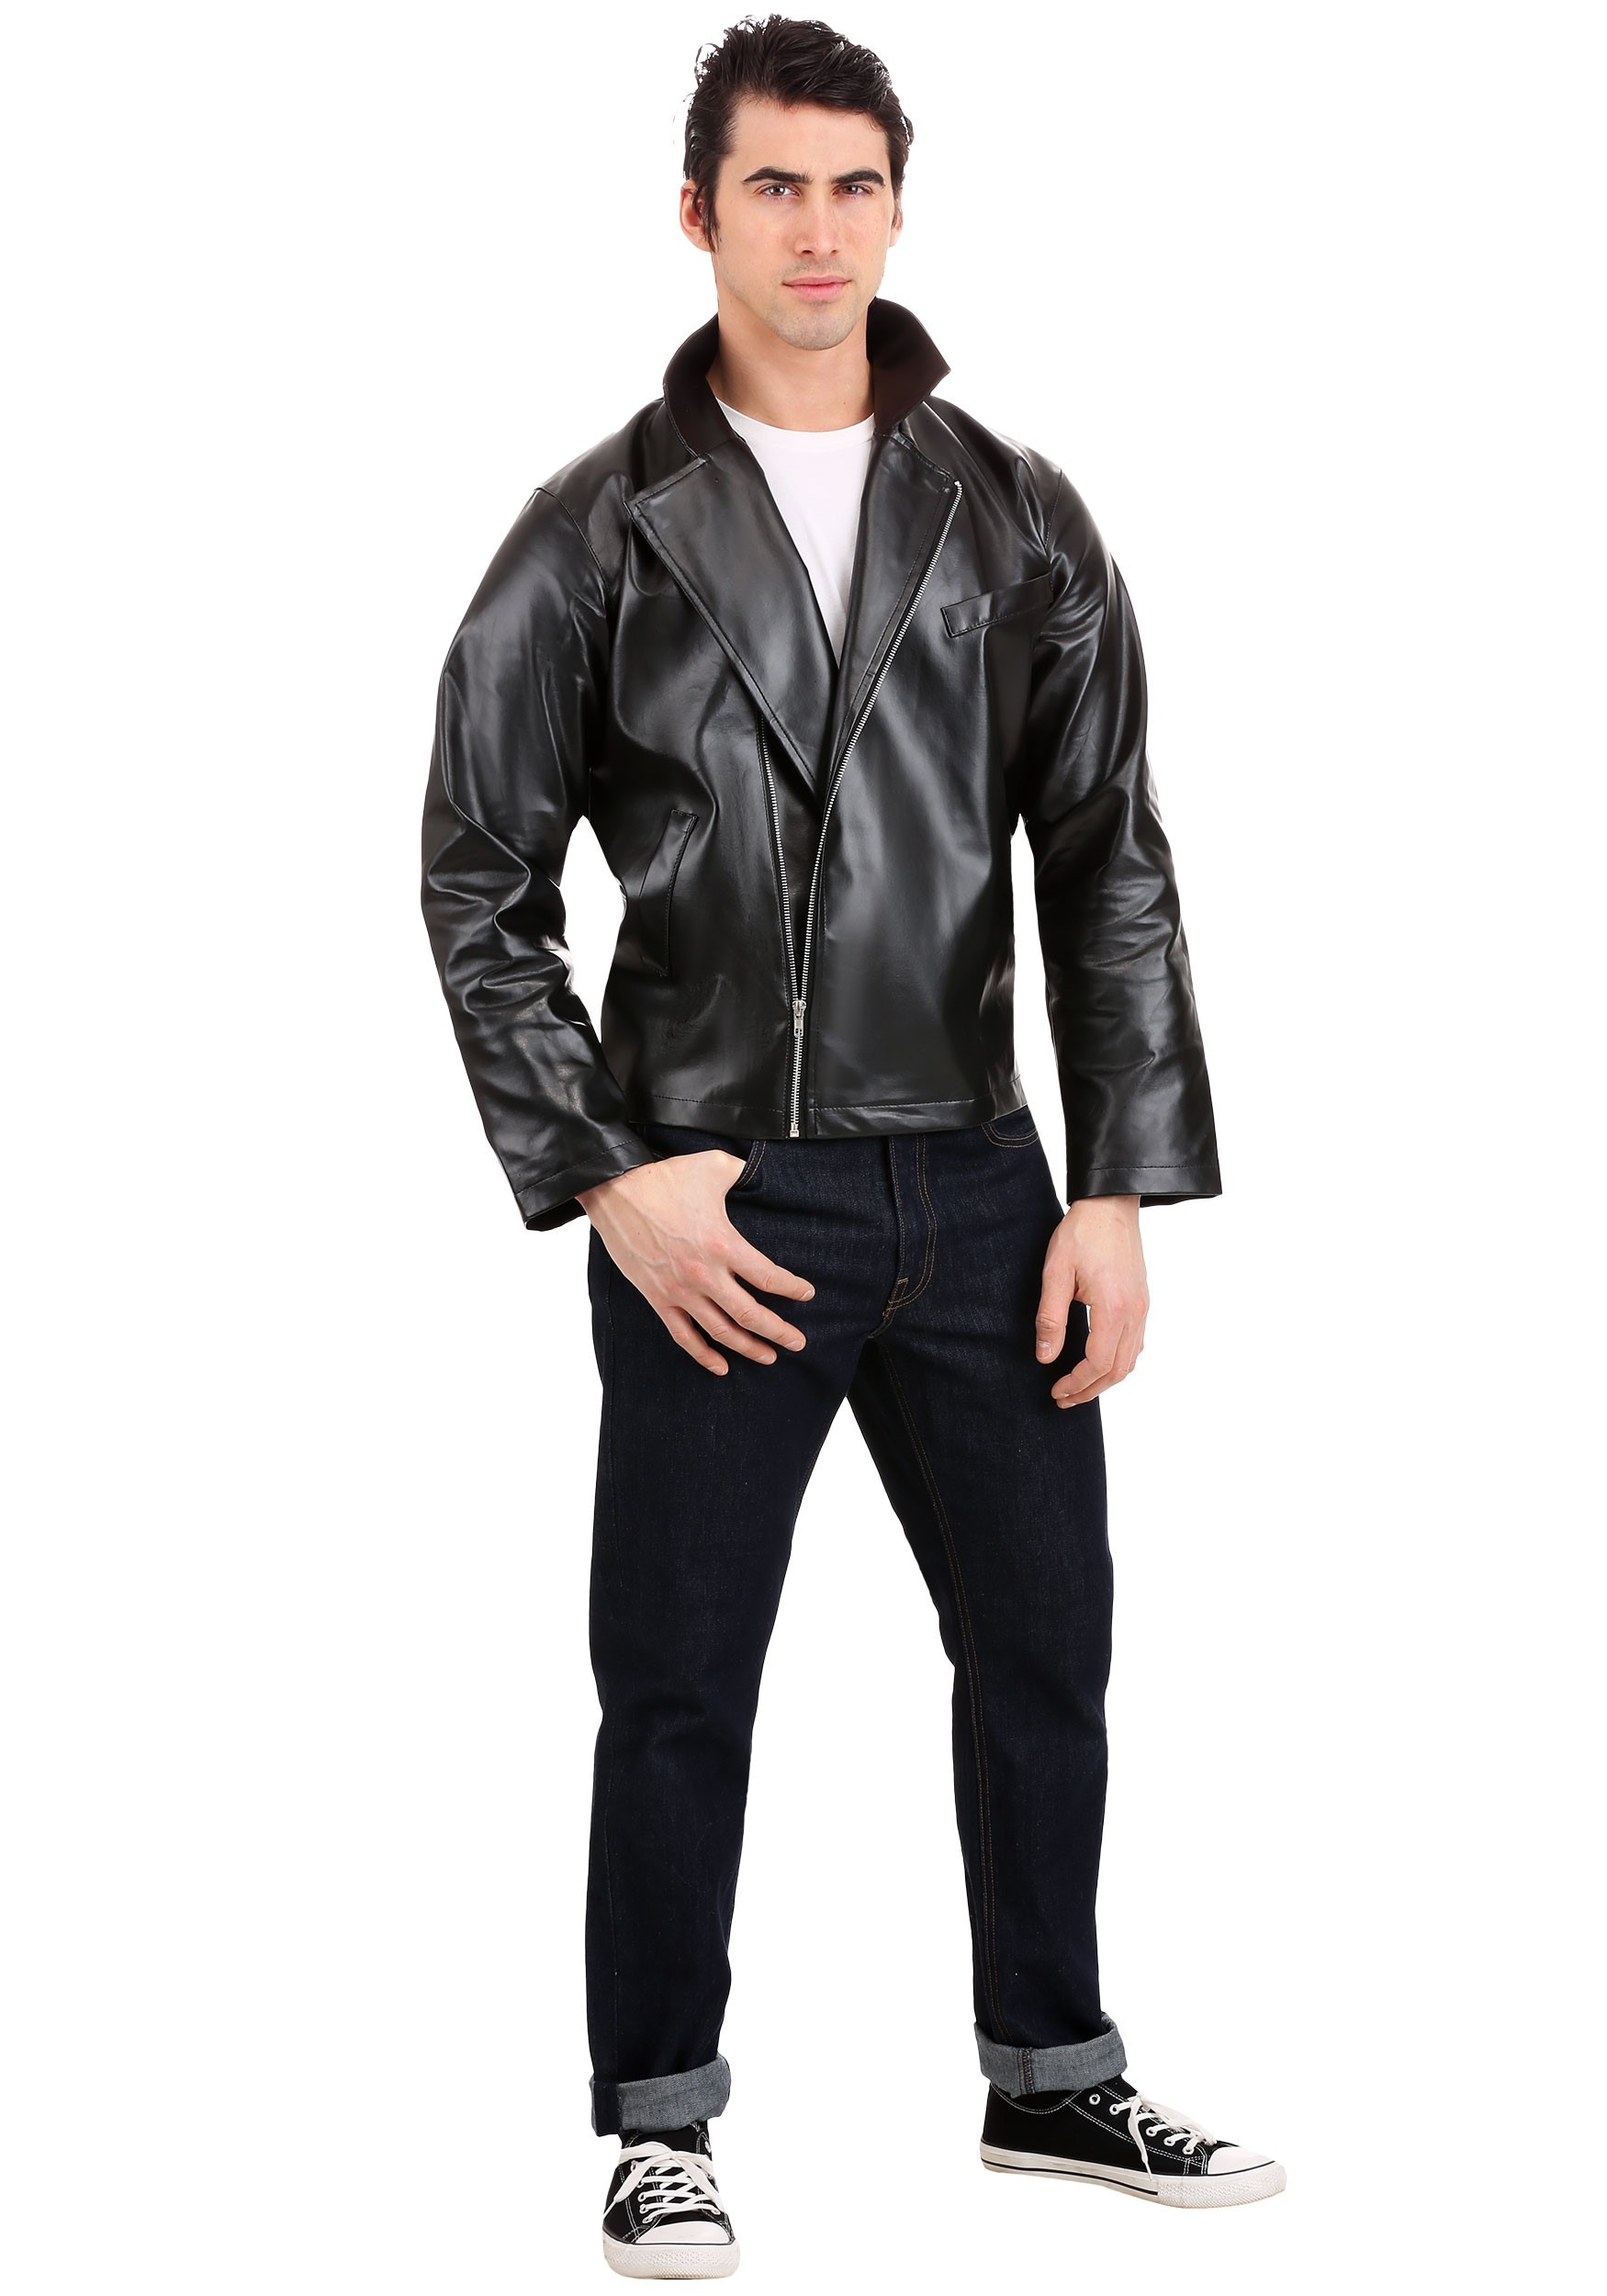 Image of Grease T-Birds Jacket Costume for Men ID GRE6007AD-L